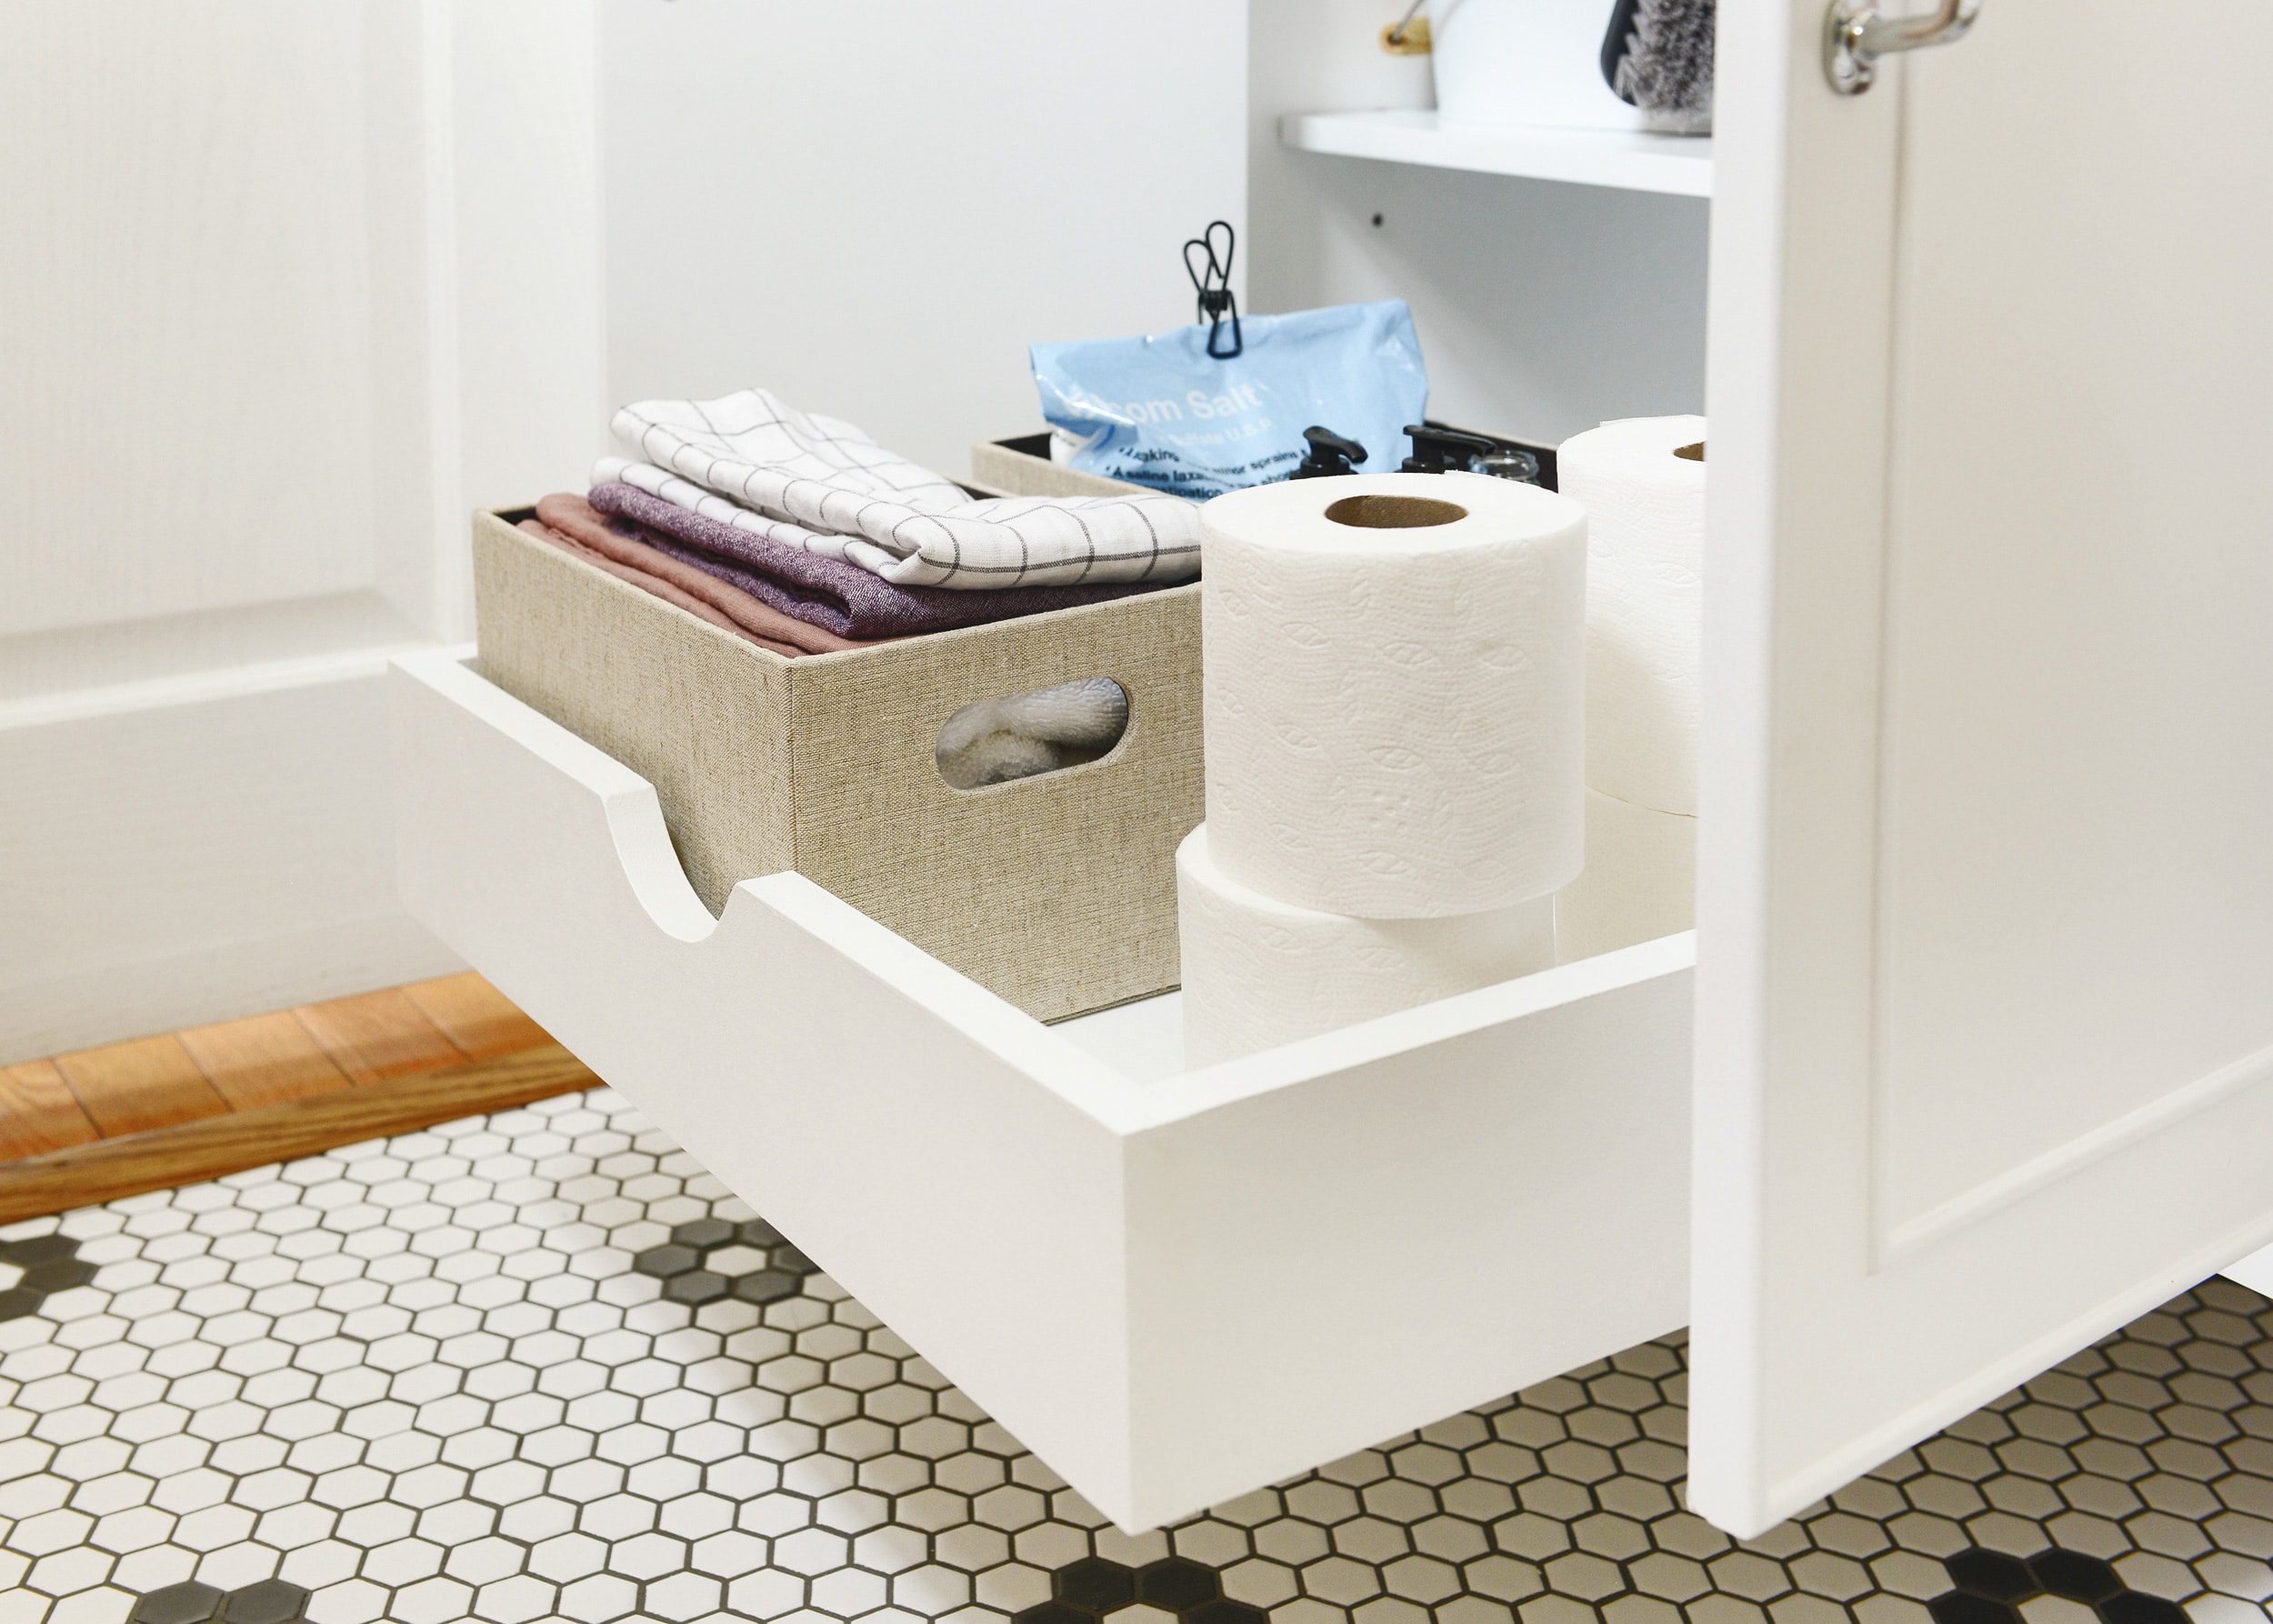 The custom sliding drawer in our Chicago guest bathroom // via Yellow Brick Home